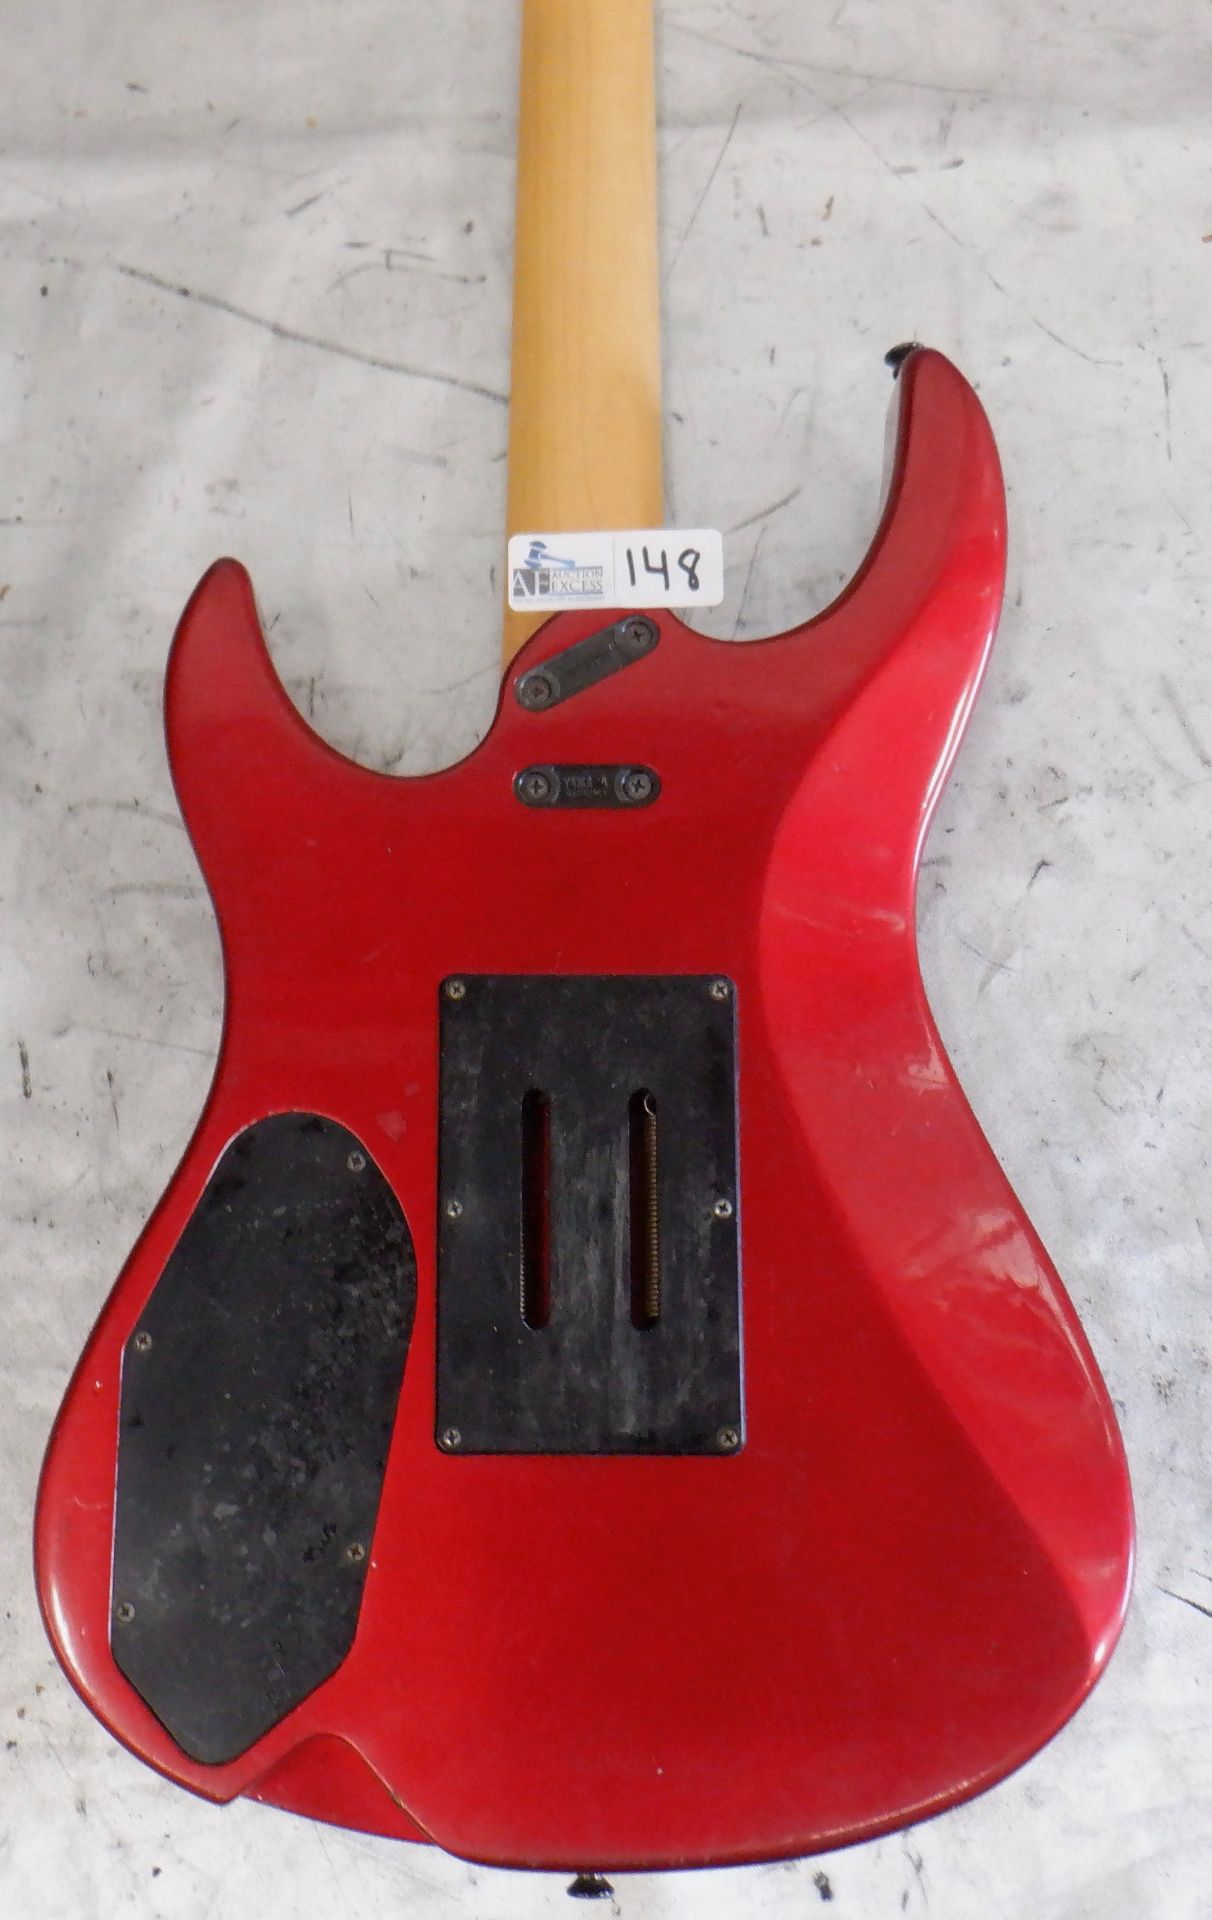 YAMAHA RGX6125 ELECTRIC GUITAR IN CASE - Image 6 of 7